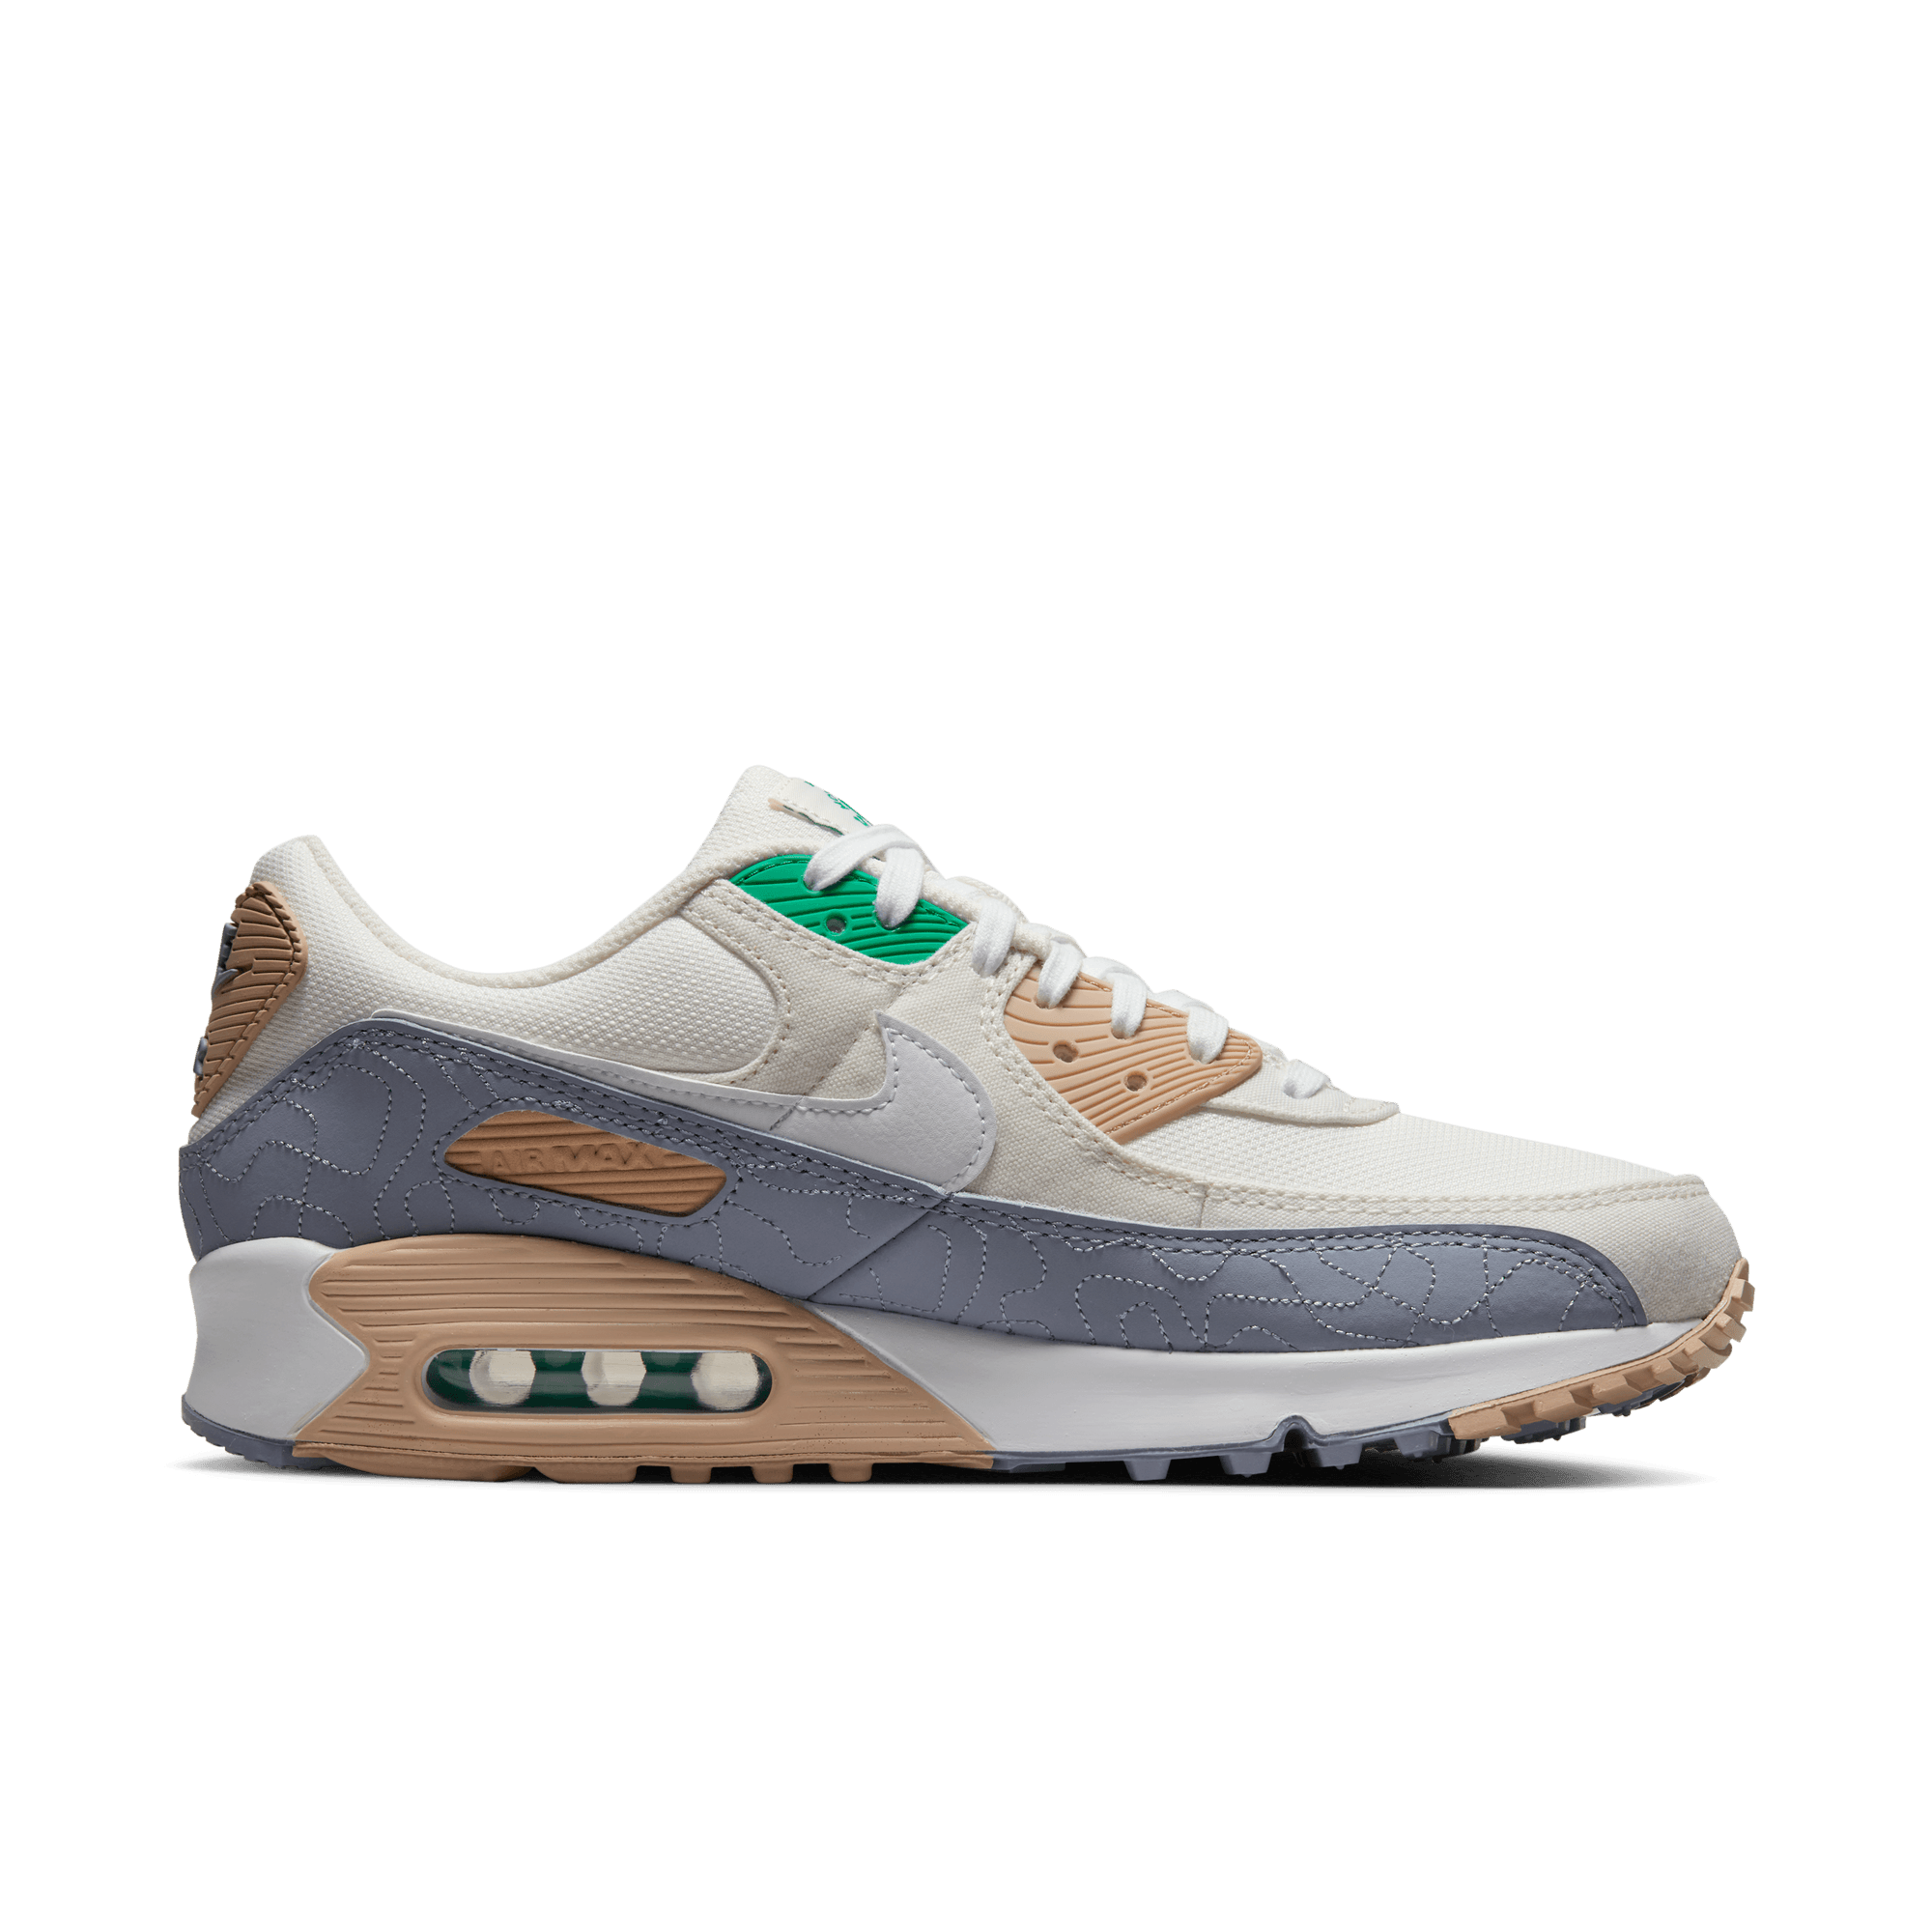 veerboot sterk fort NIKE AIR MAX 90 SE "MOVING COMPANY" | lapstoneandhammer.com